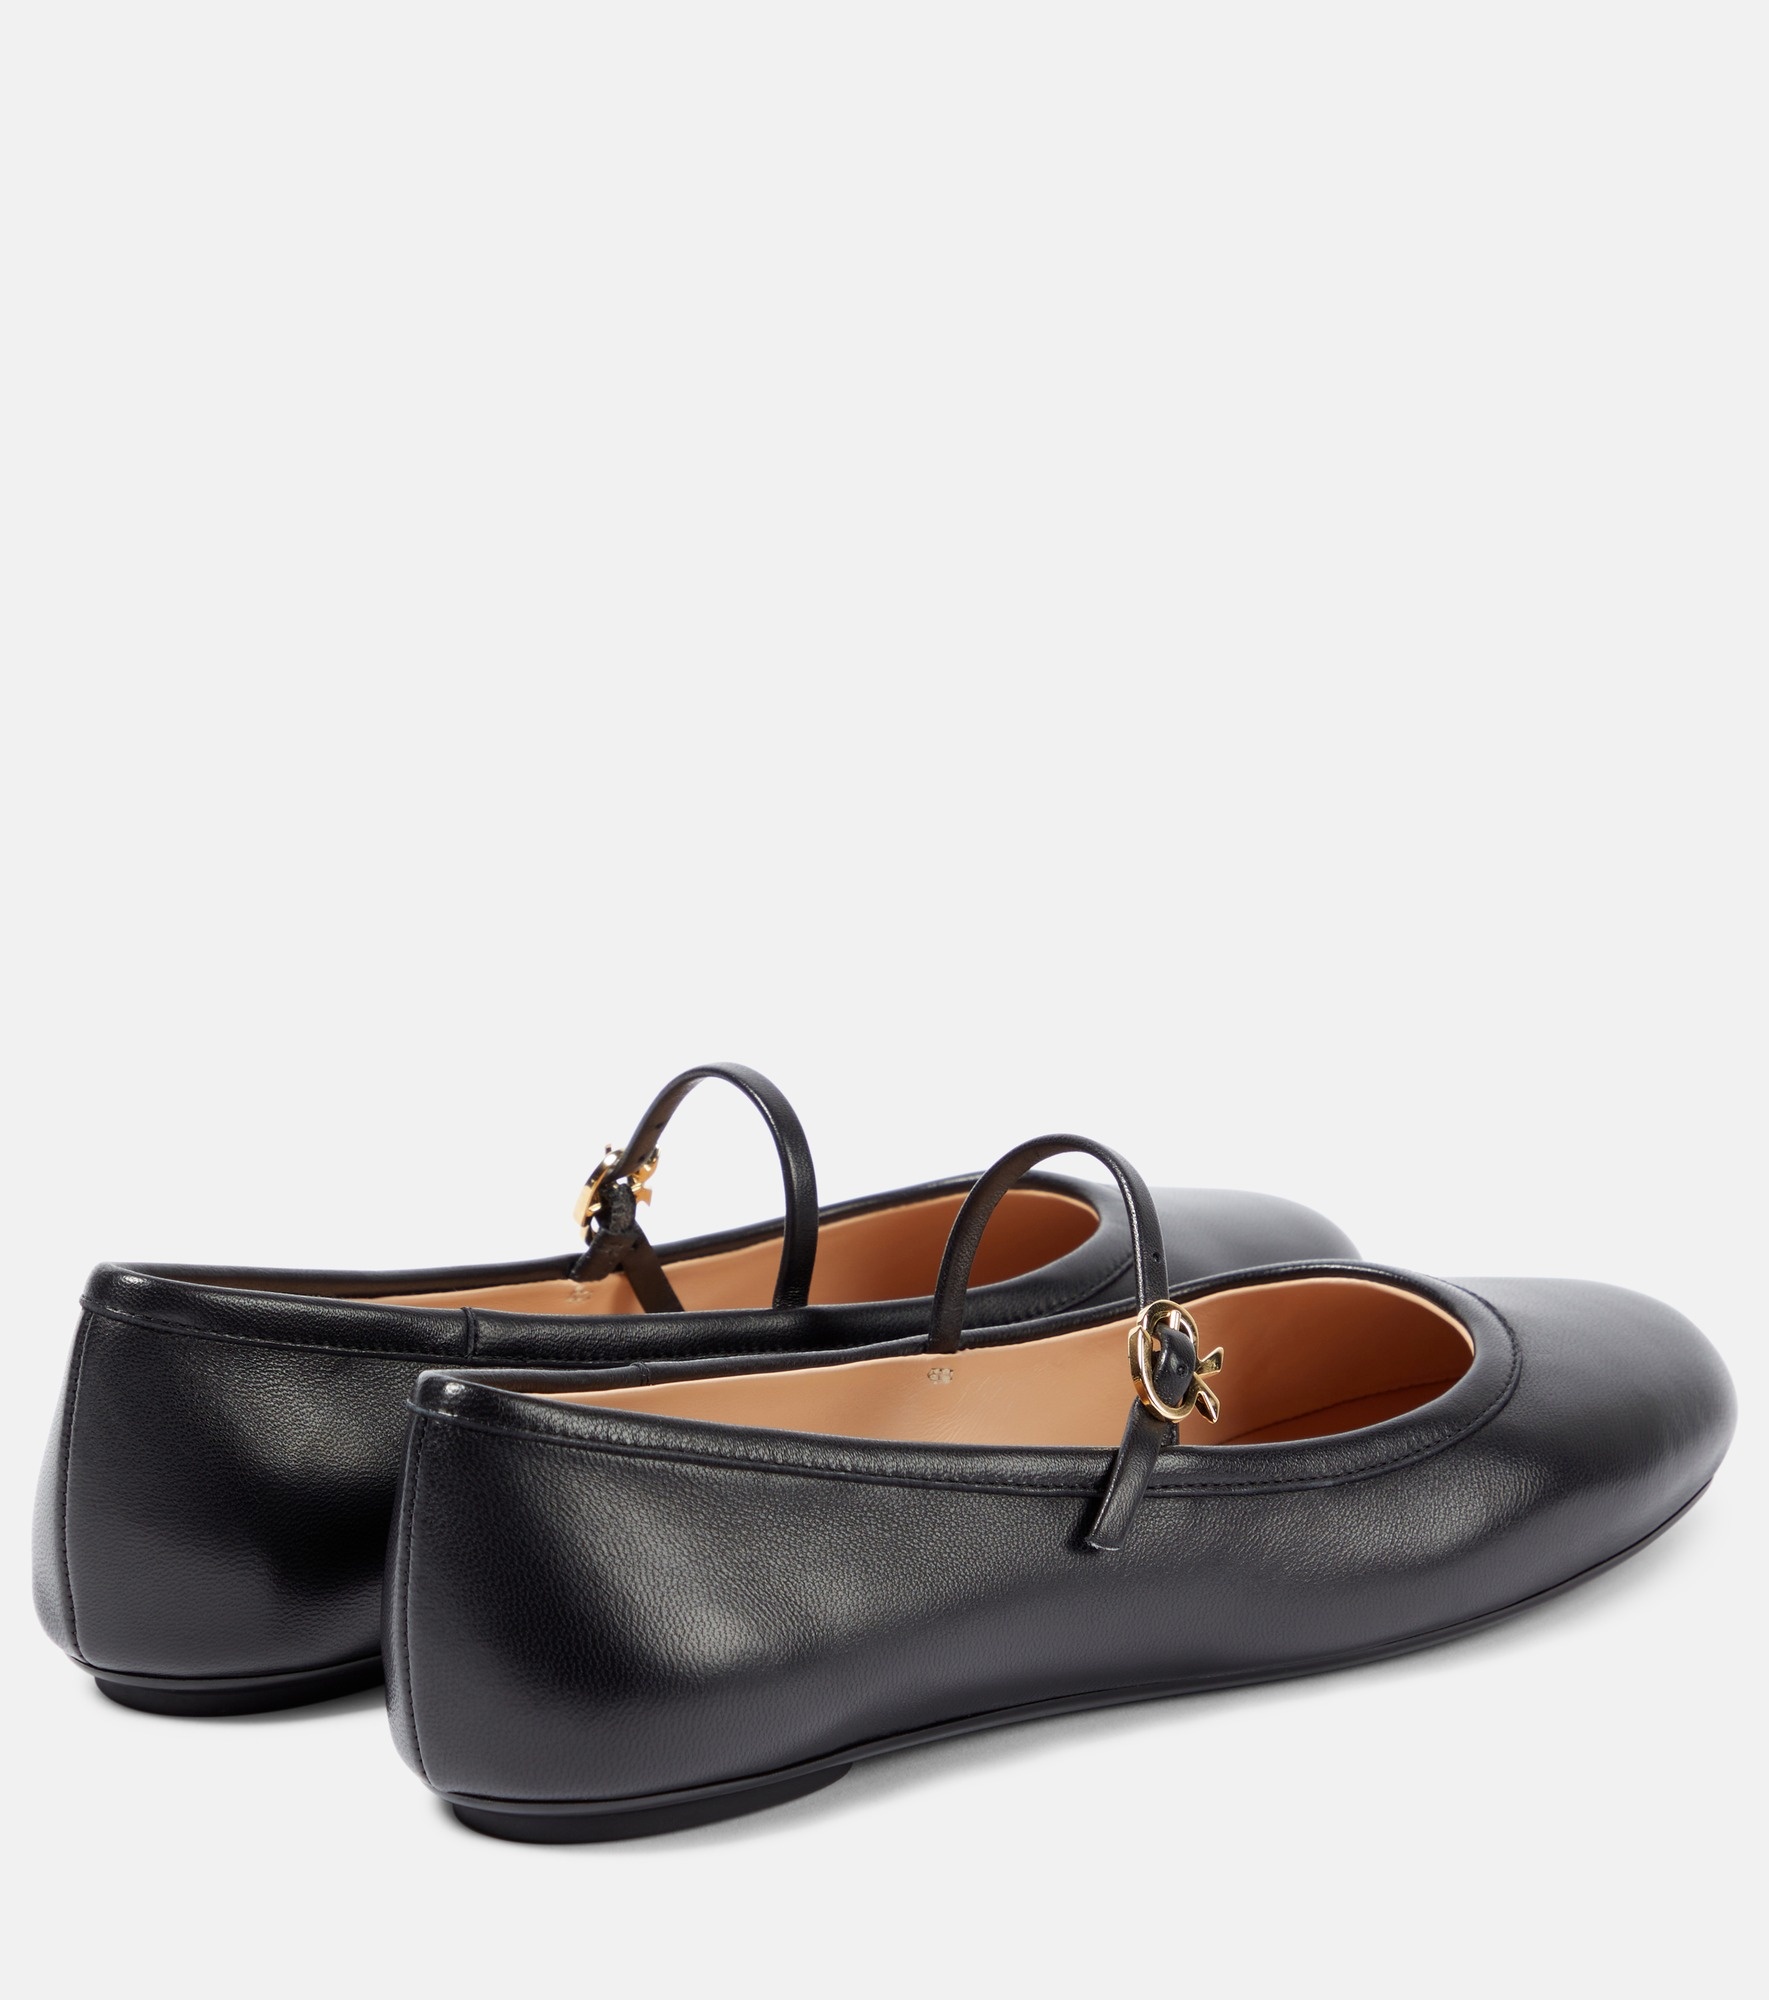 Carla leather Mary Jane ballet flats - 3